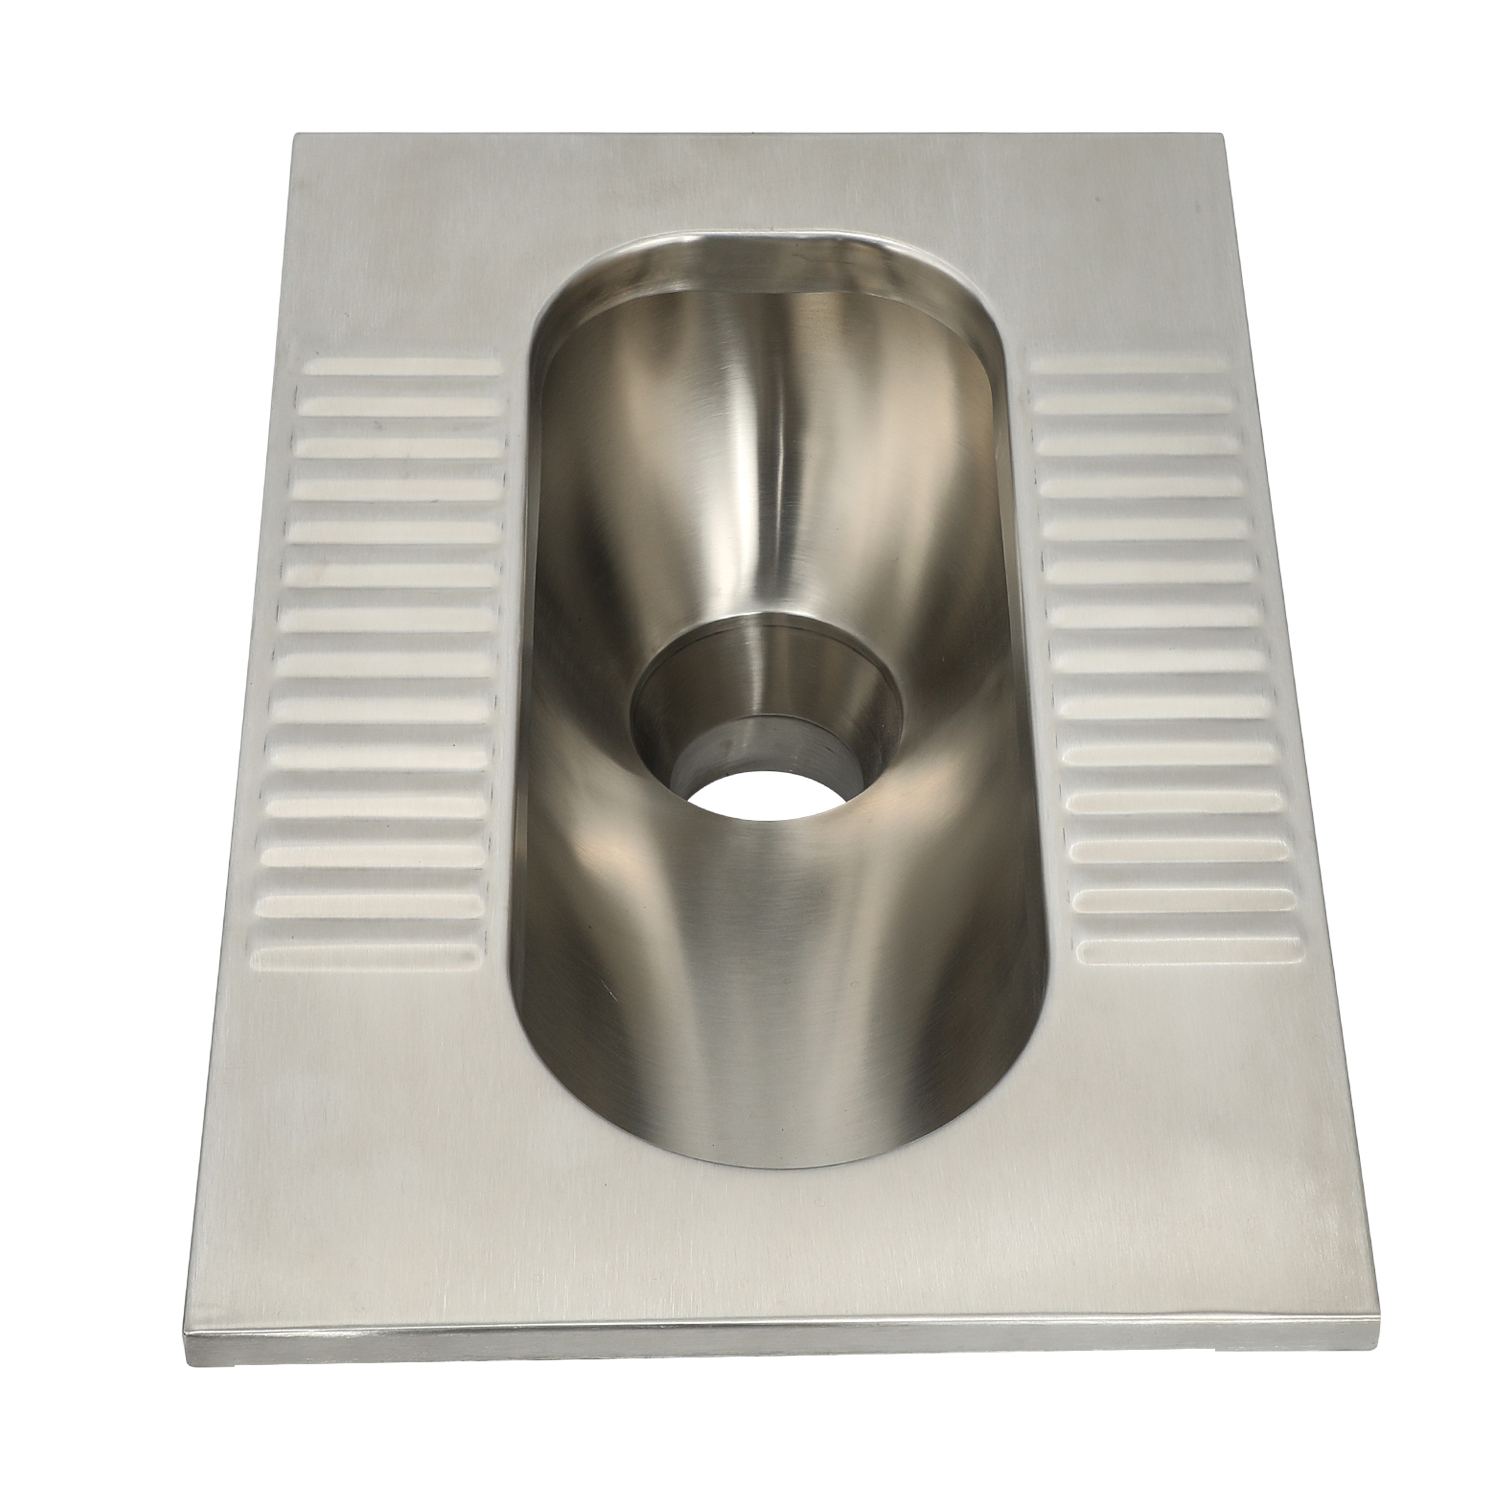 Stainless Steel P-Trap Squatting Toilet